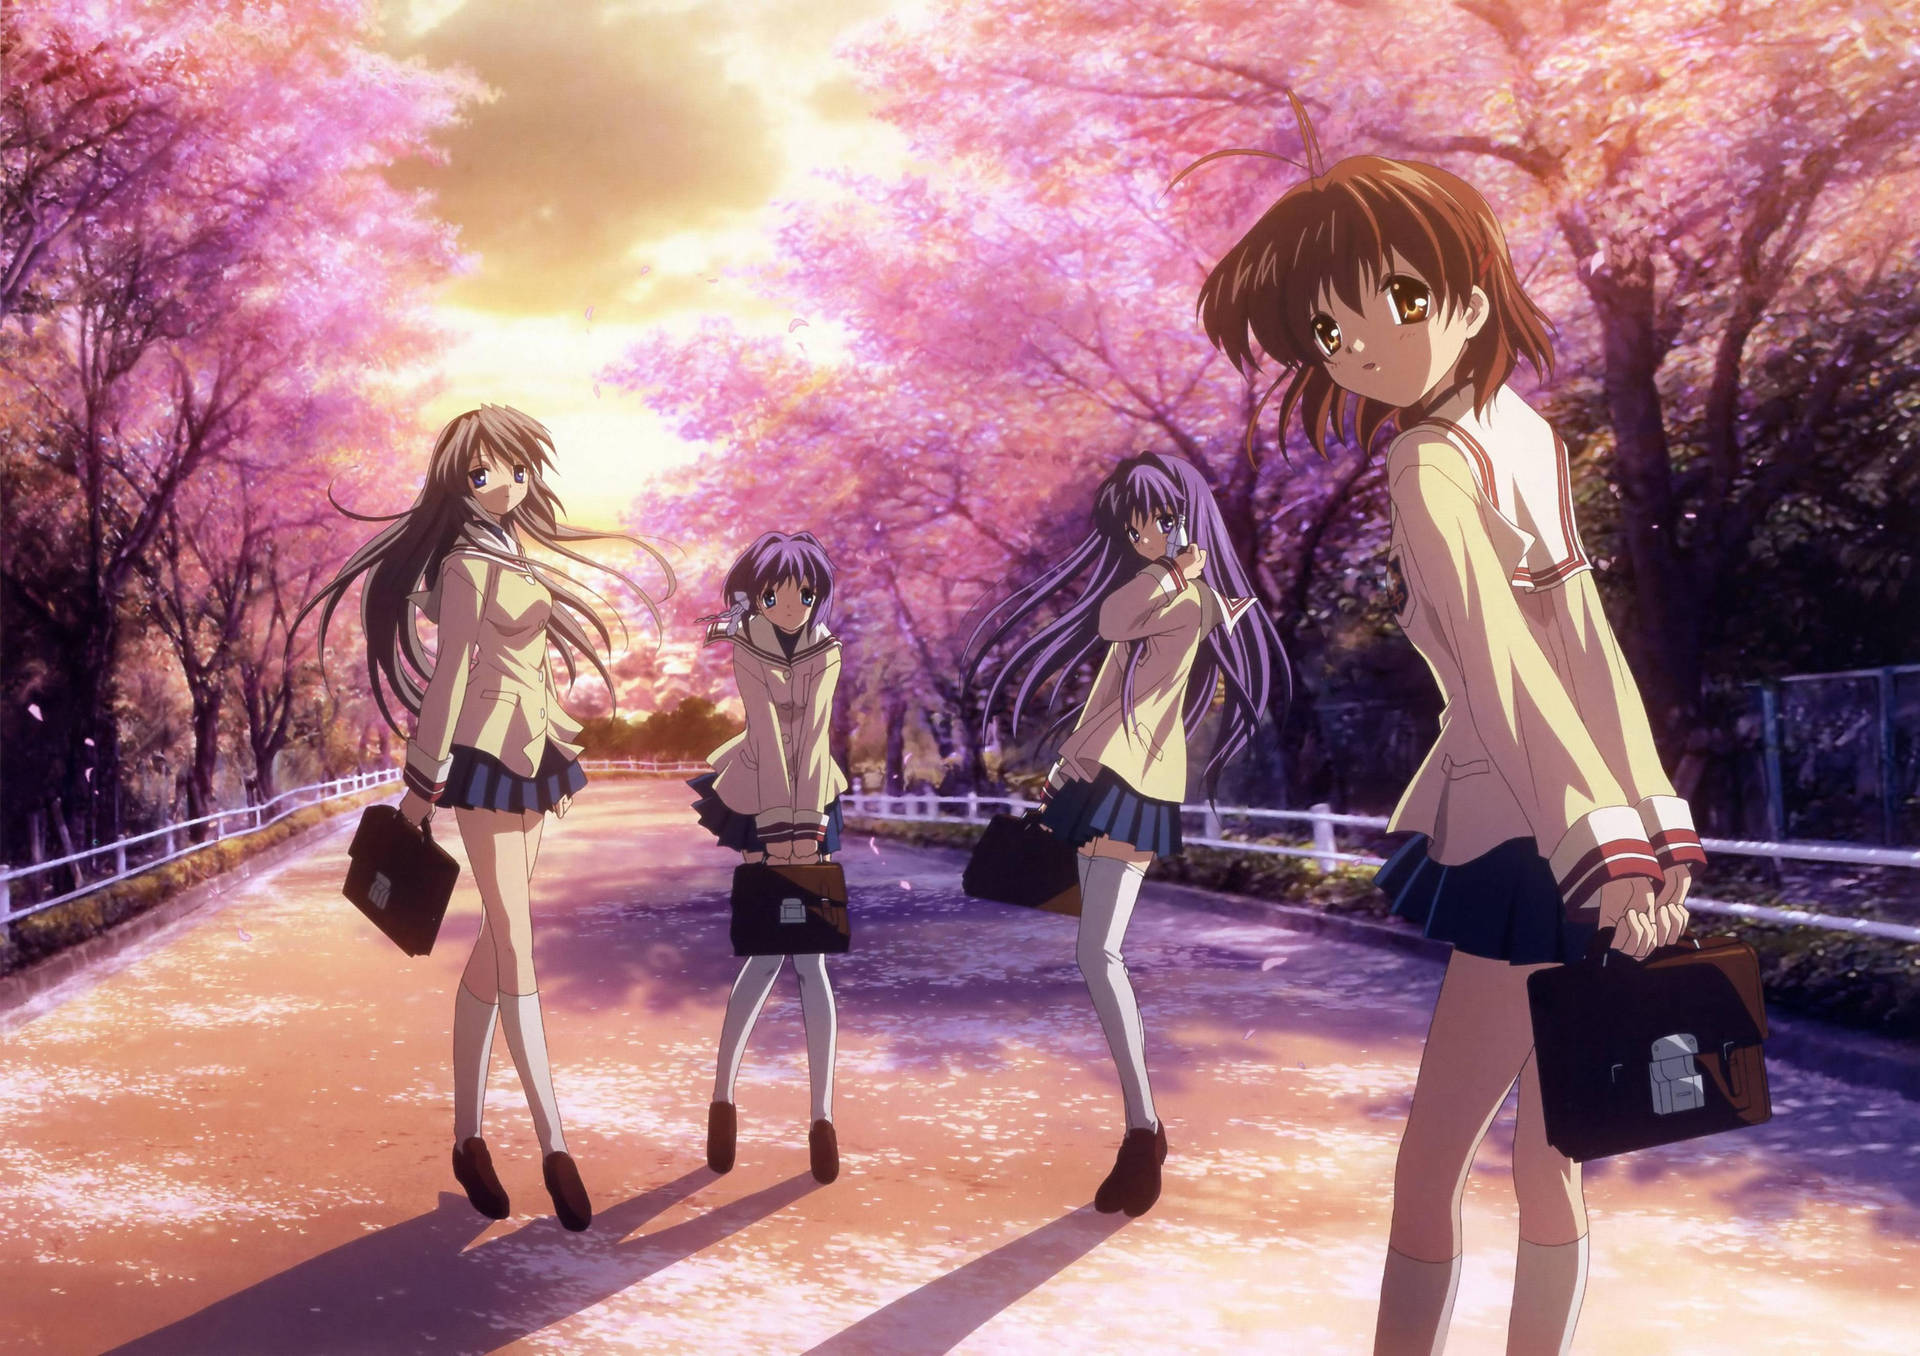 Download Top Anime Clannad Girls Wallpaper Wallpapers Com